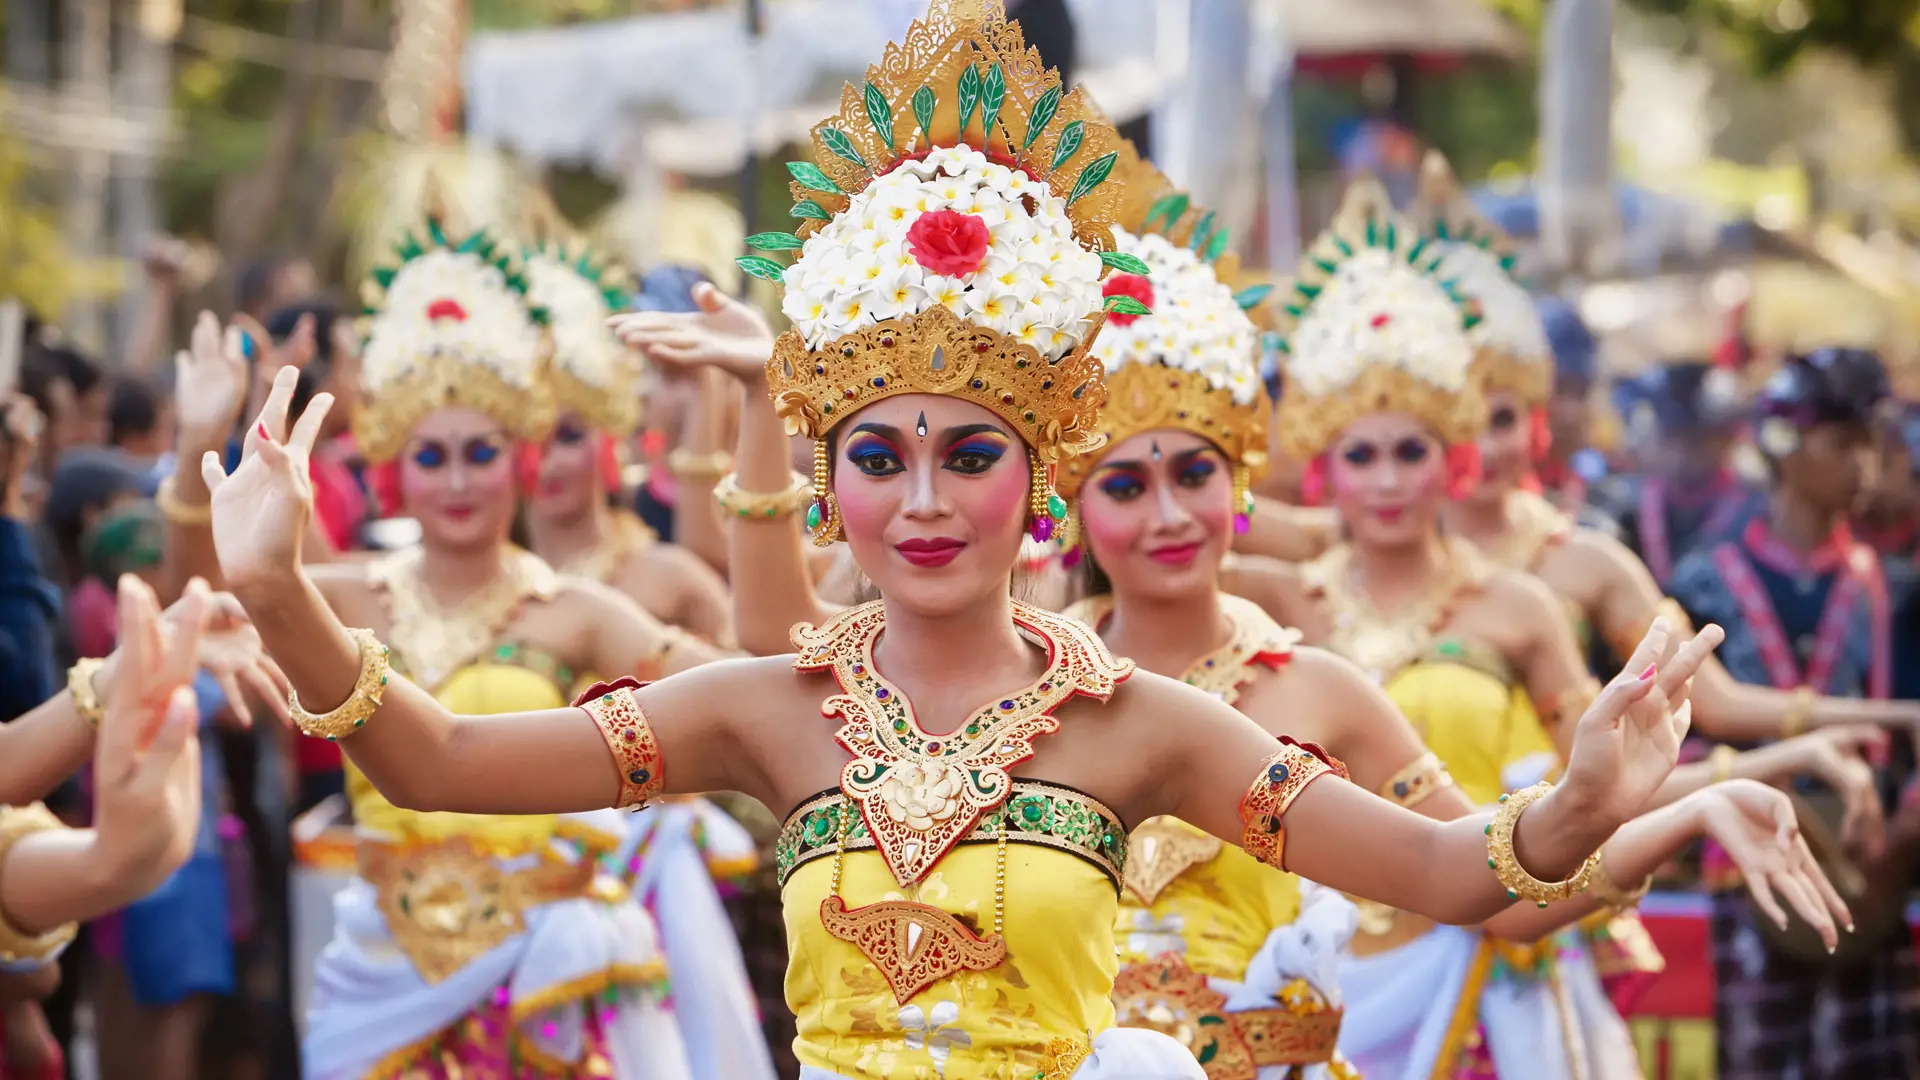 shutterstock_347774750 BALI, INDONESIA - JUNE 13, 2015 Women group dressed in colorful sarongs - Balinese style female dancer costume, dancing traditional temple dance Legong at Bali Art and Culture Festiv.jpg